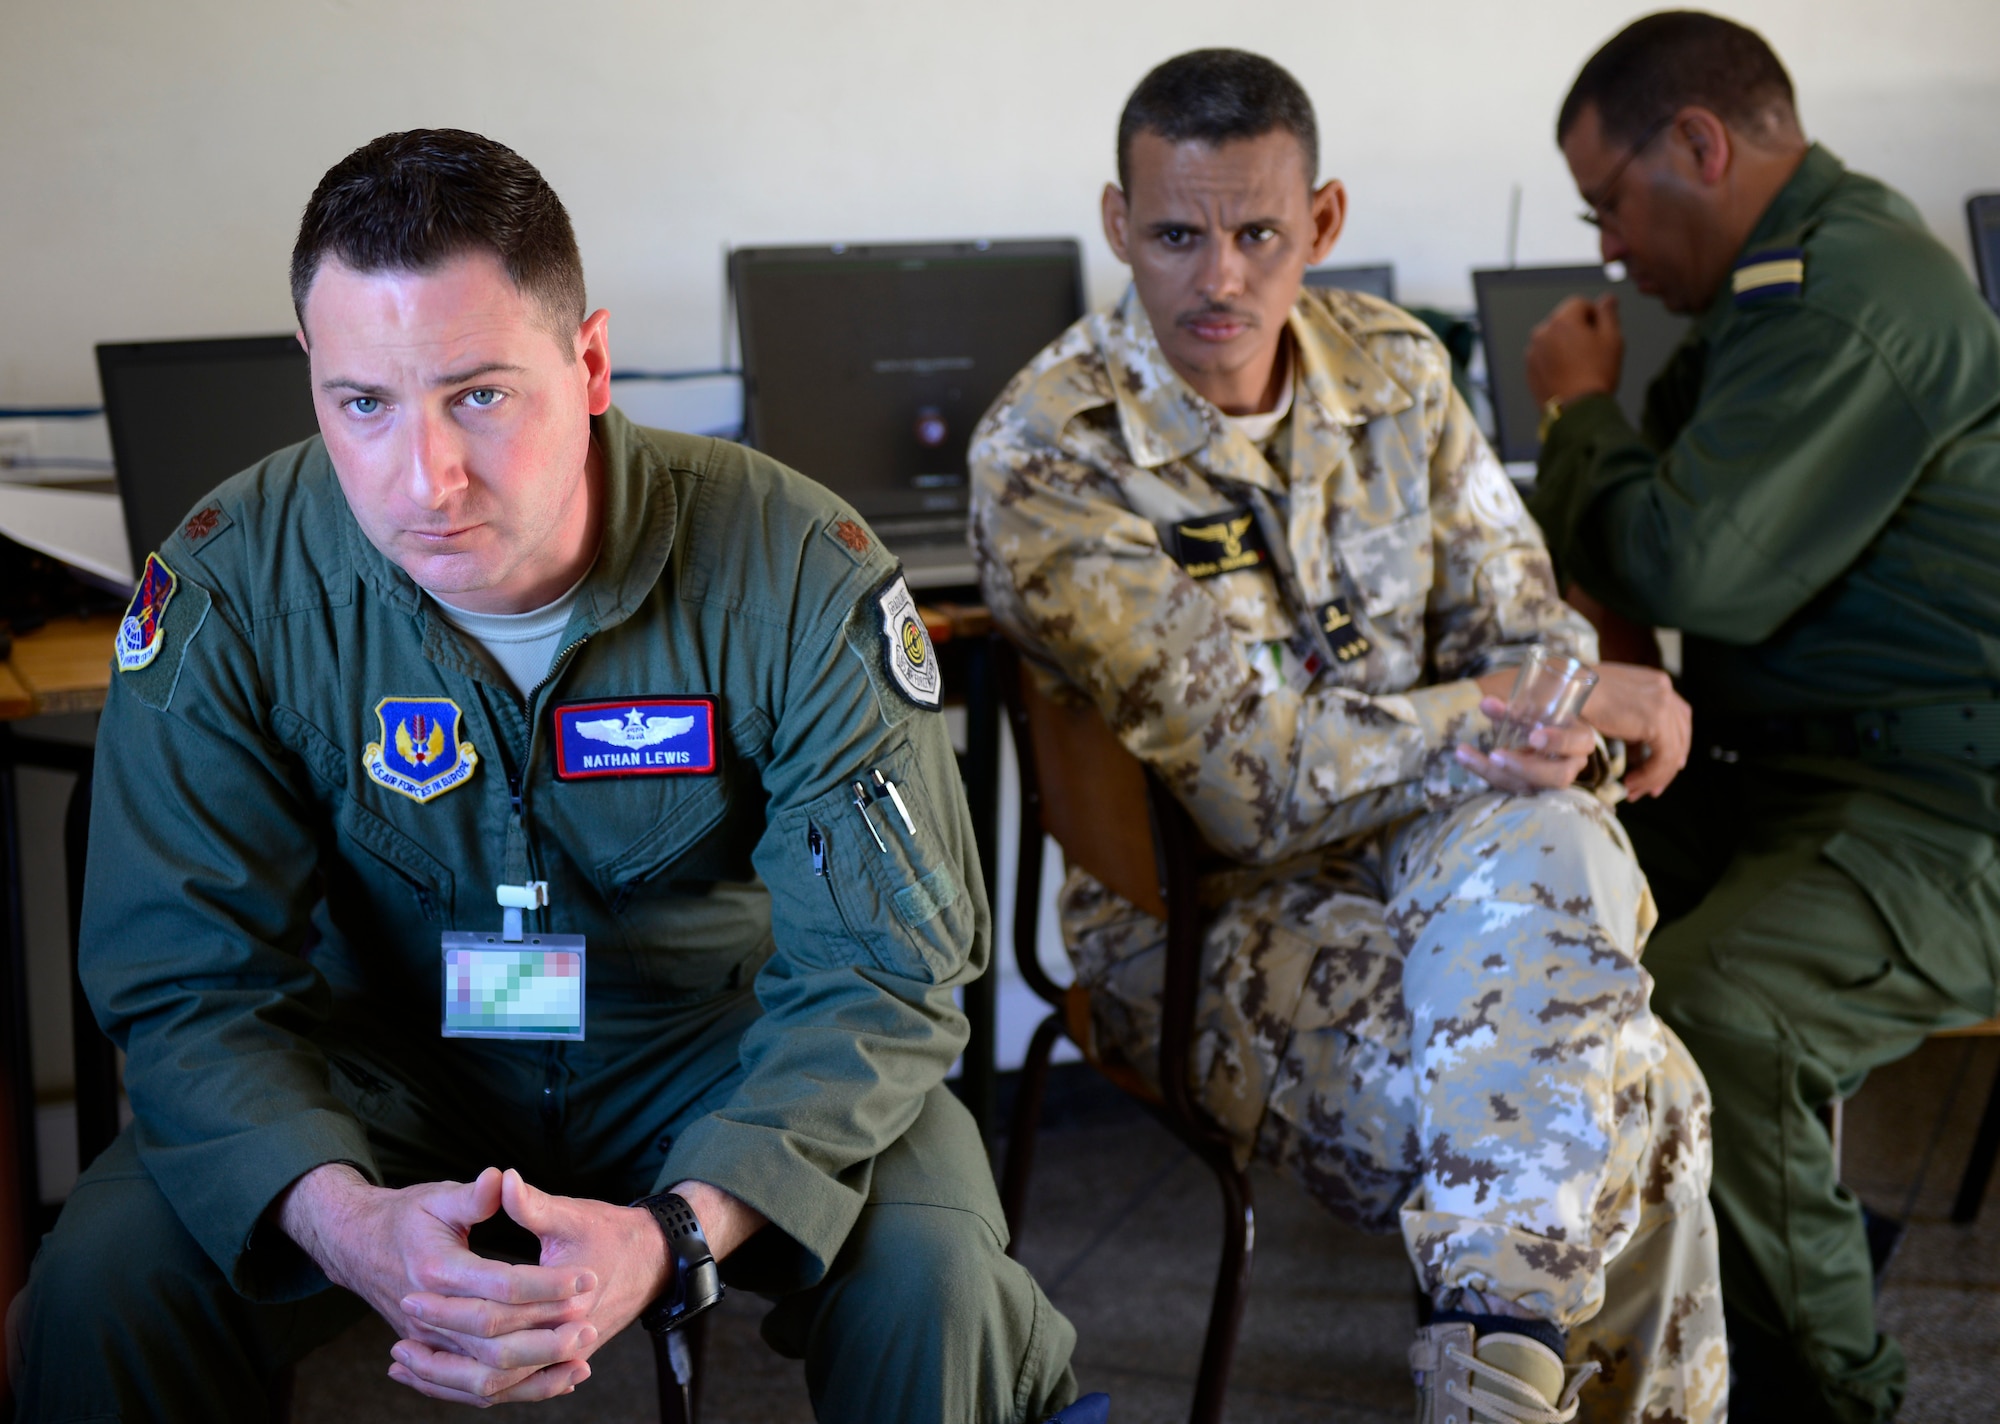 U.S. Air Force Maj. Nathan Lewis, 603rd Air and Space Operations Center Exercise Combined Joint Air Command staff member, discusses the upcoming exercise for AFRICAN LION 16 with military members from other nations at Inezgane, Kingdom of Morocco, April 23, 2016. Lewis is an Air Force Reservist. The majority of the Air Force contingent are Air Force Reservists or Air Guardsmen. 400 U.S. service members joined with over 350 personnel from 10 other countries to create a foundation for future partnerships and provide training to all nations on command post activities and peace support operations. (U.S. Air Force photo by Senior Airman Krystal Ardrey/Released)